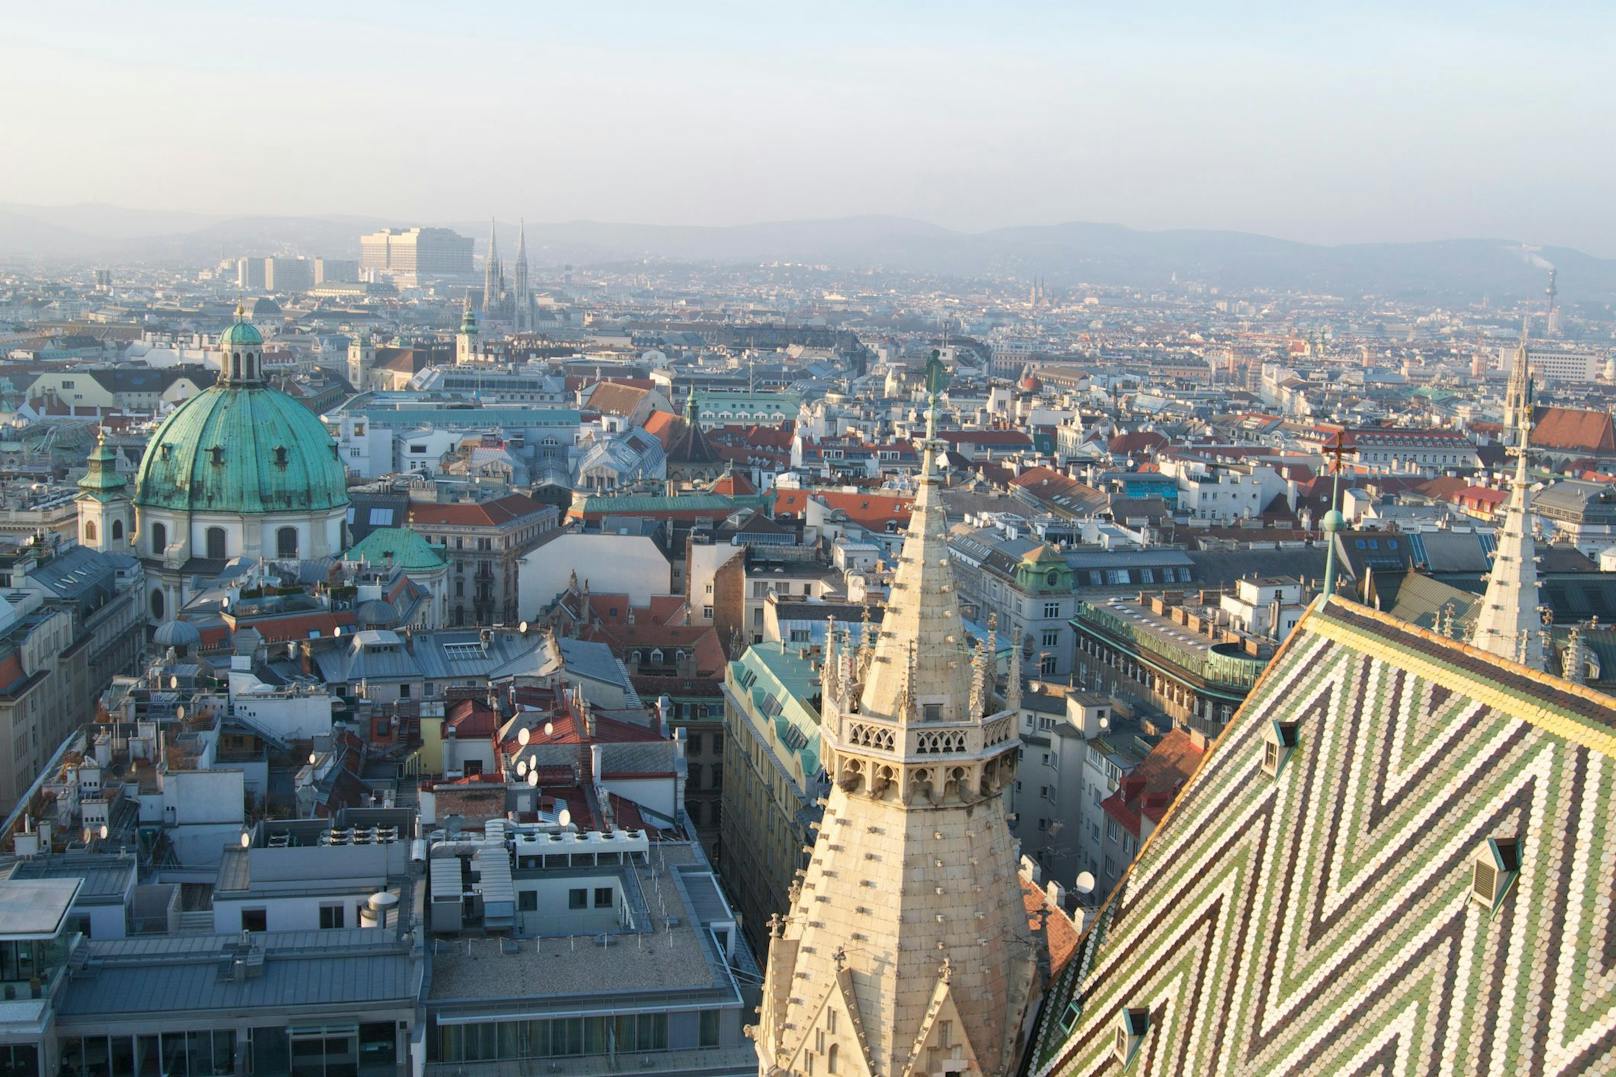 A panoramic shot of Vienna, Austria, taken from the top of St. Stephens' Cathedral.